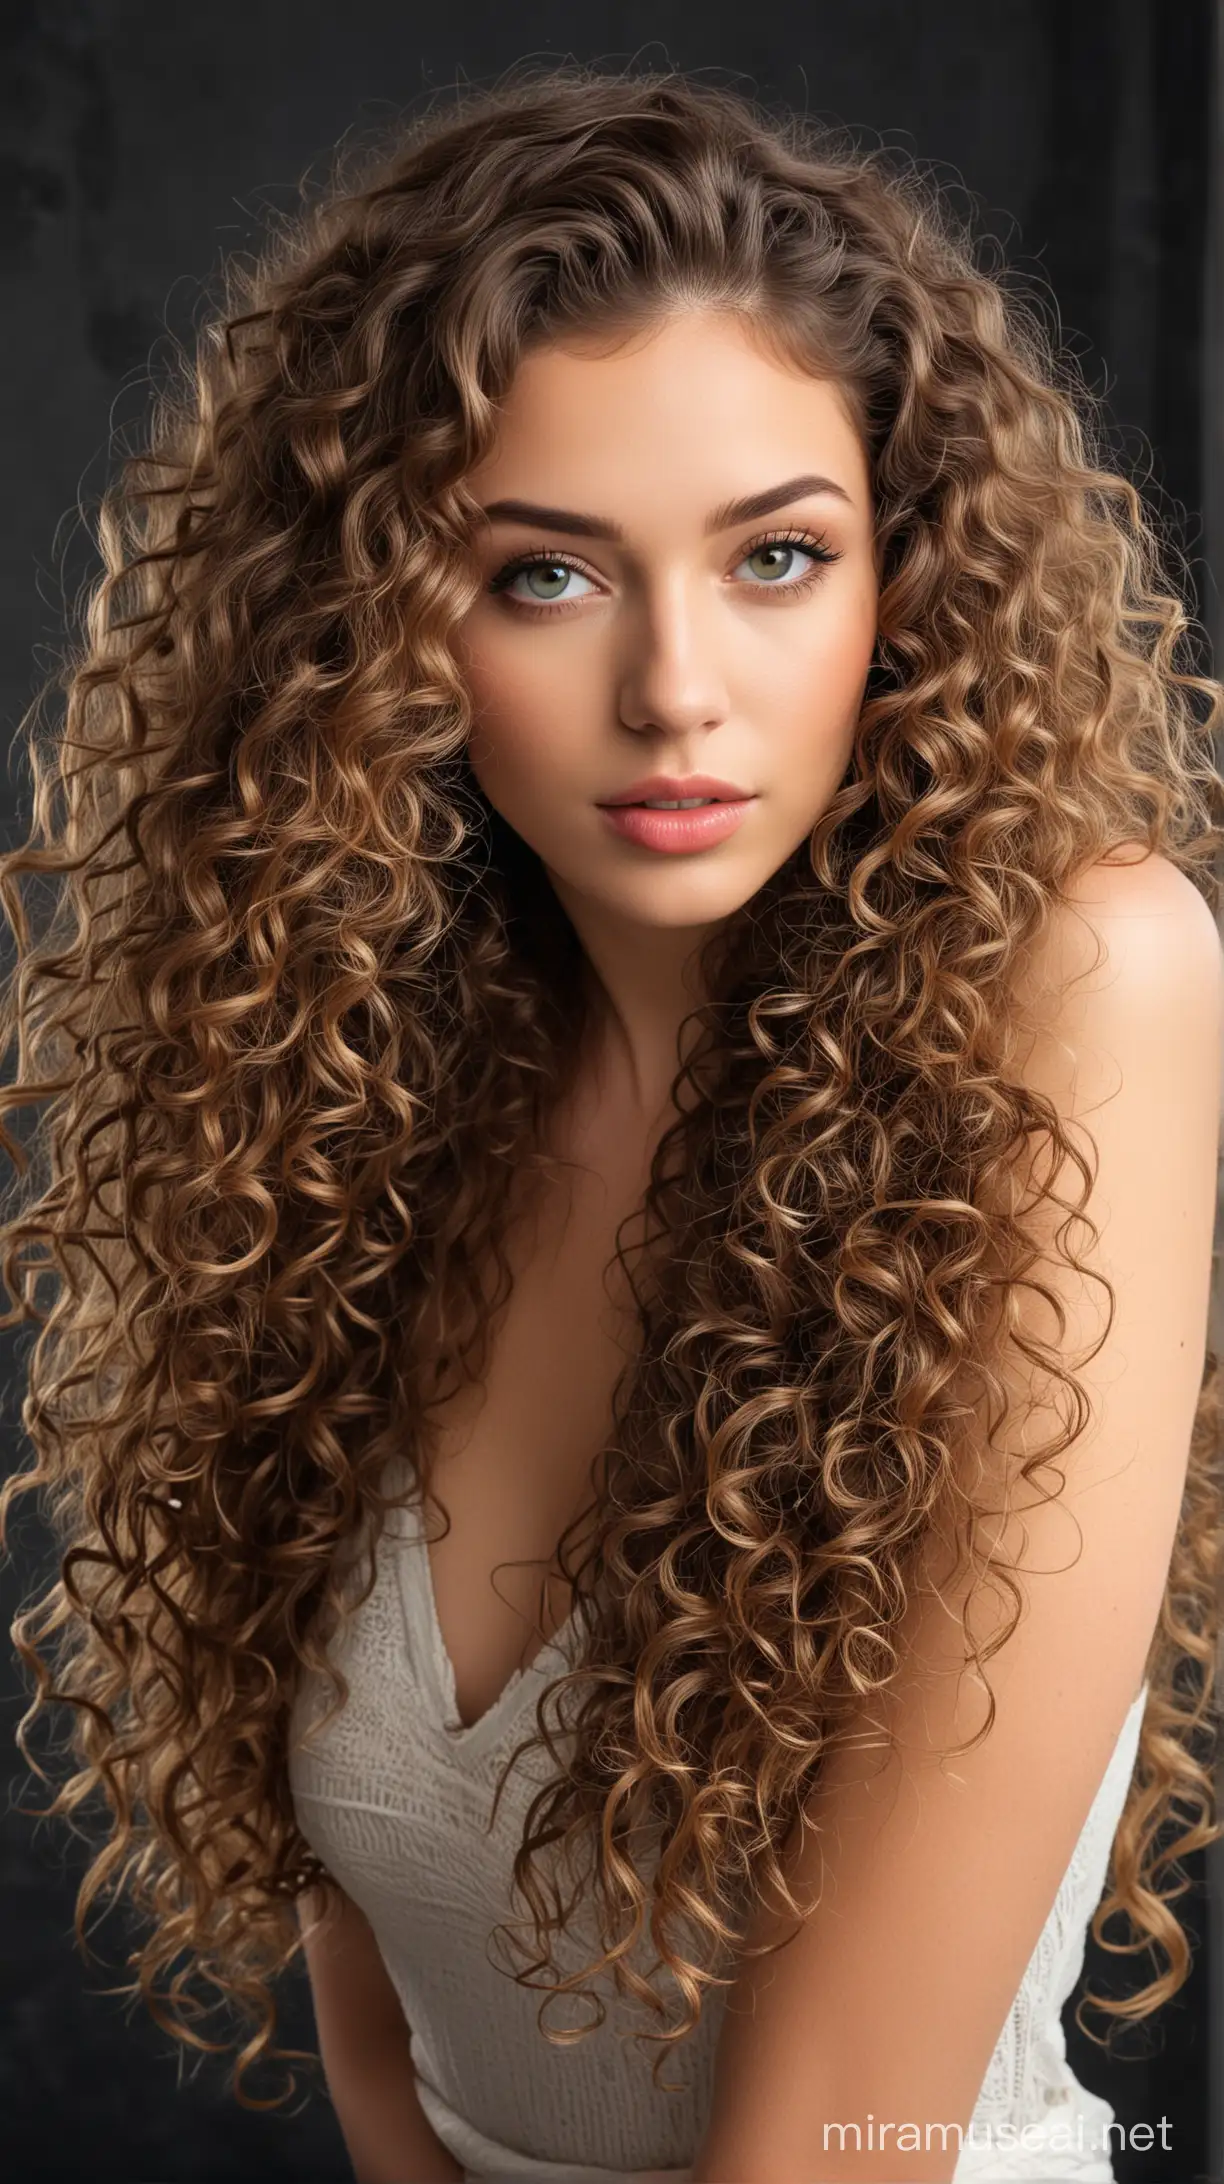 Stunning Model with Curly Long Hair in Elegant Setting